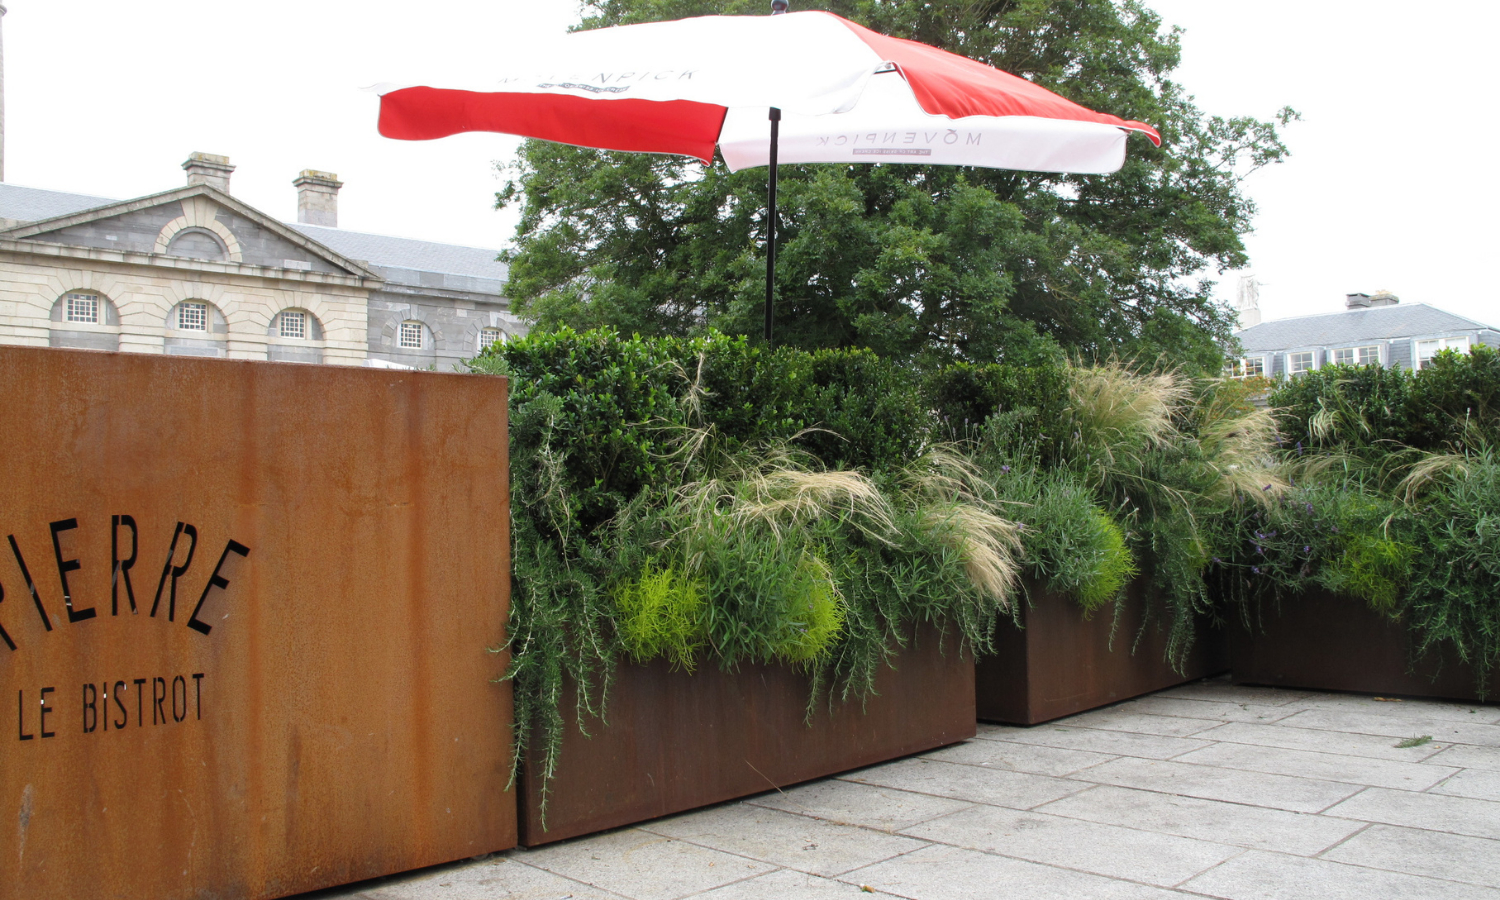 Barrier planters